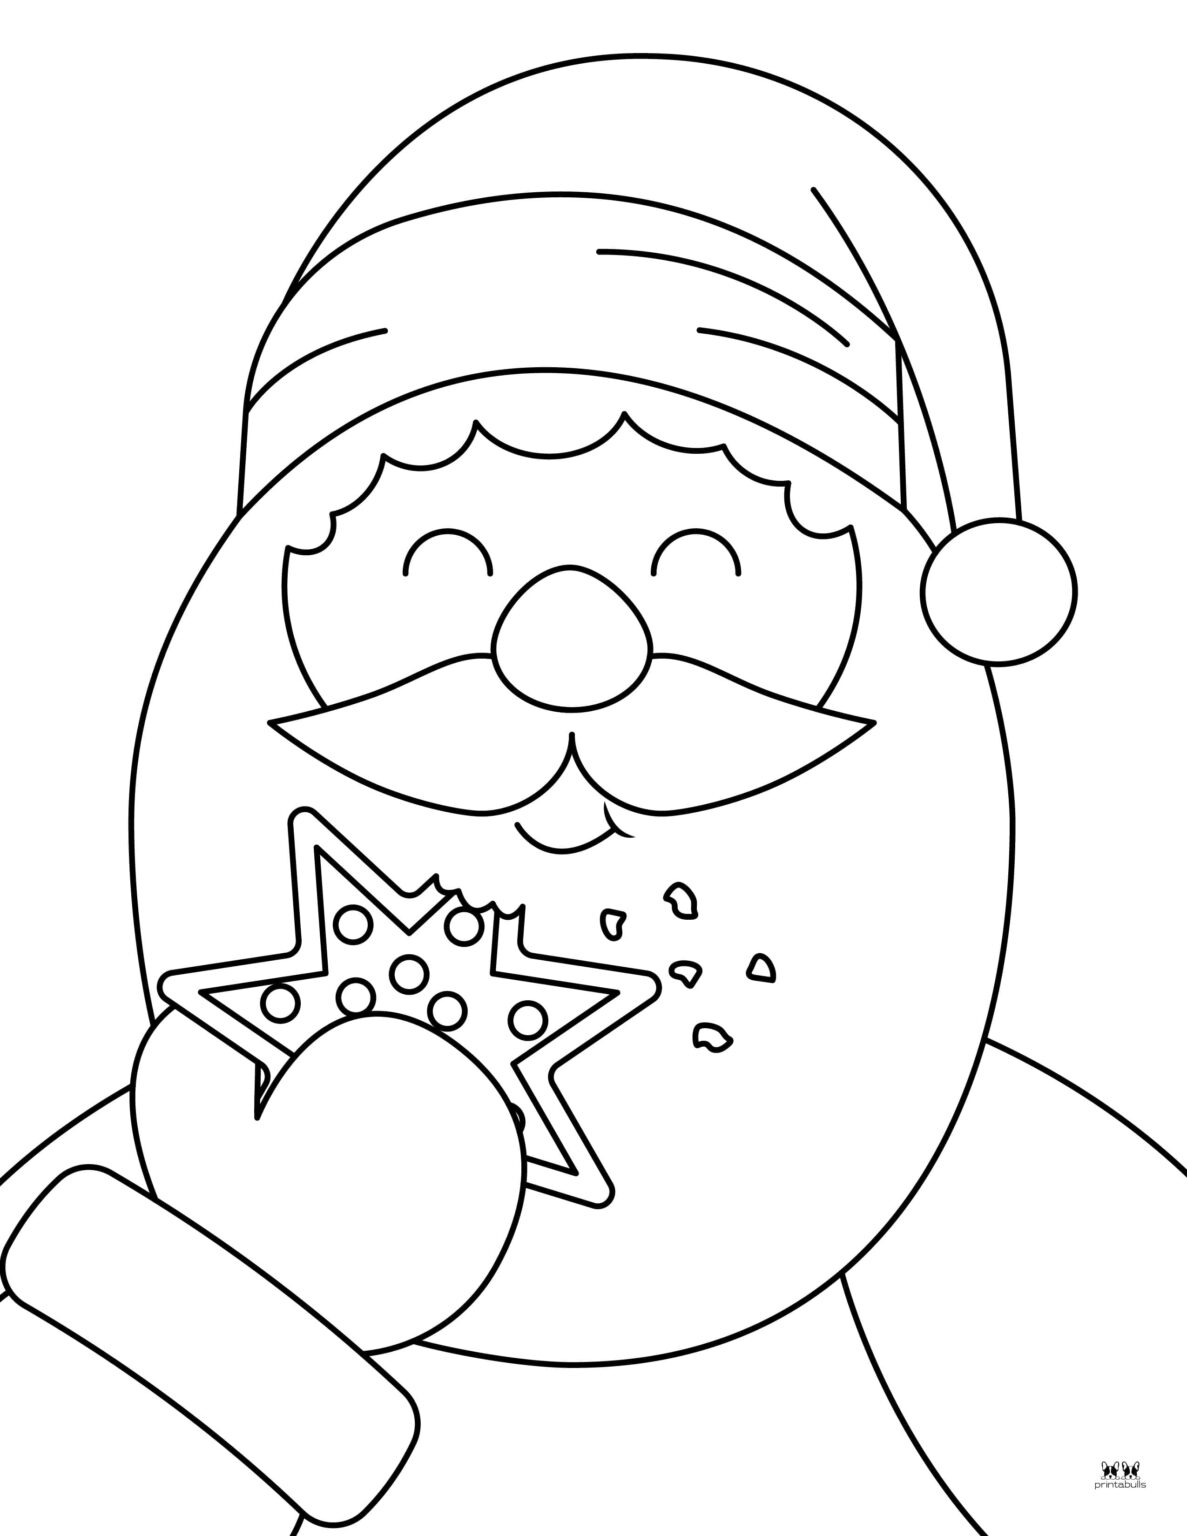 Christmas Cookies Coloring Pages - 25 FREE Pages | Printabulls